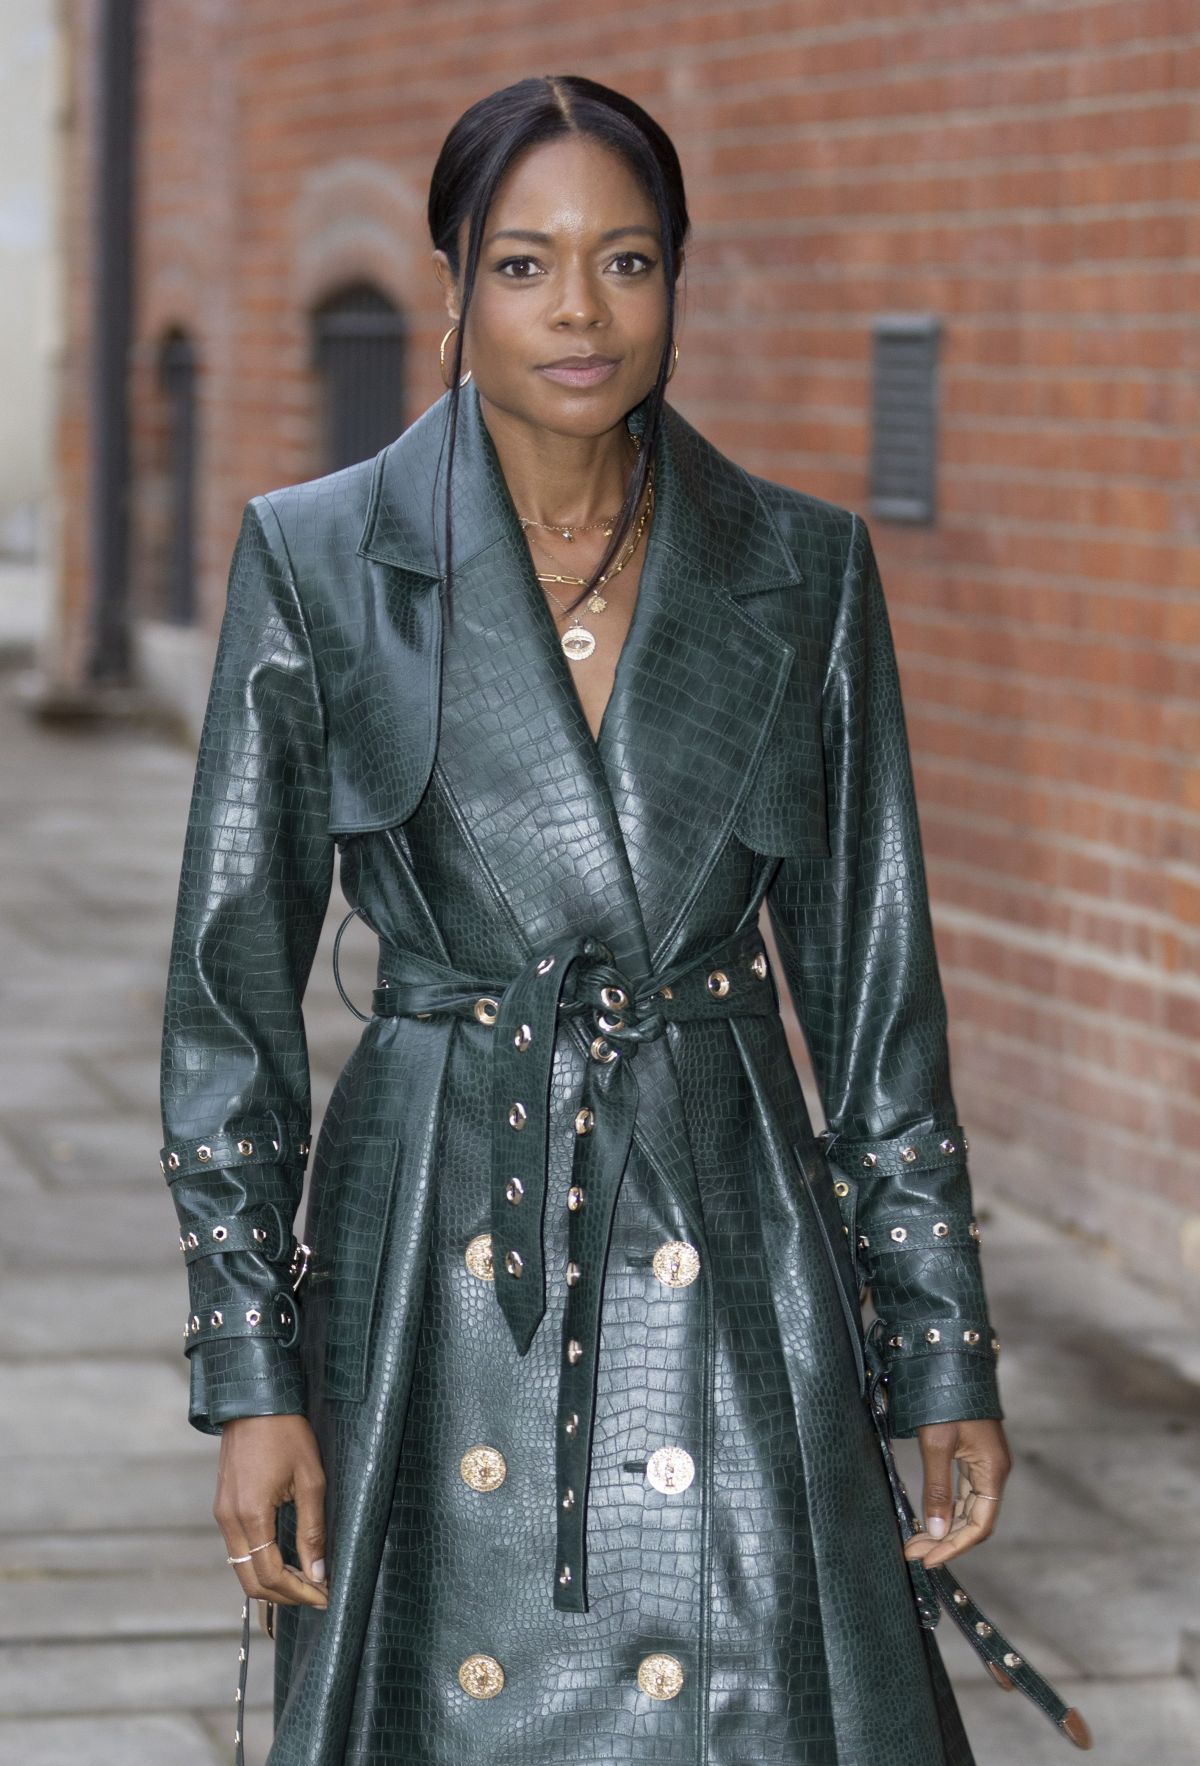 Naomie Harris Arrives at Mithridate Pre-LFW Fashion Show in London 6